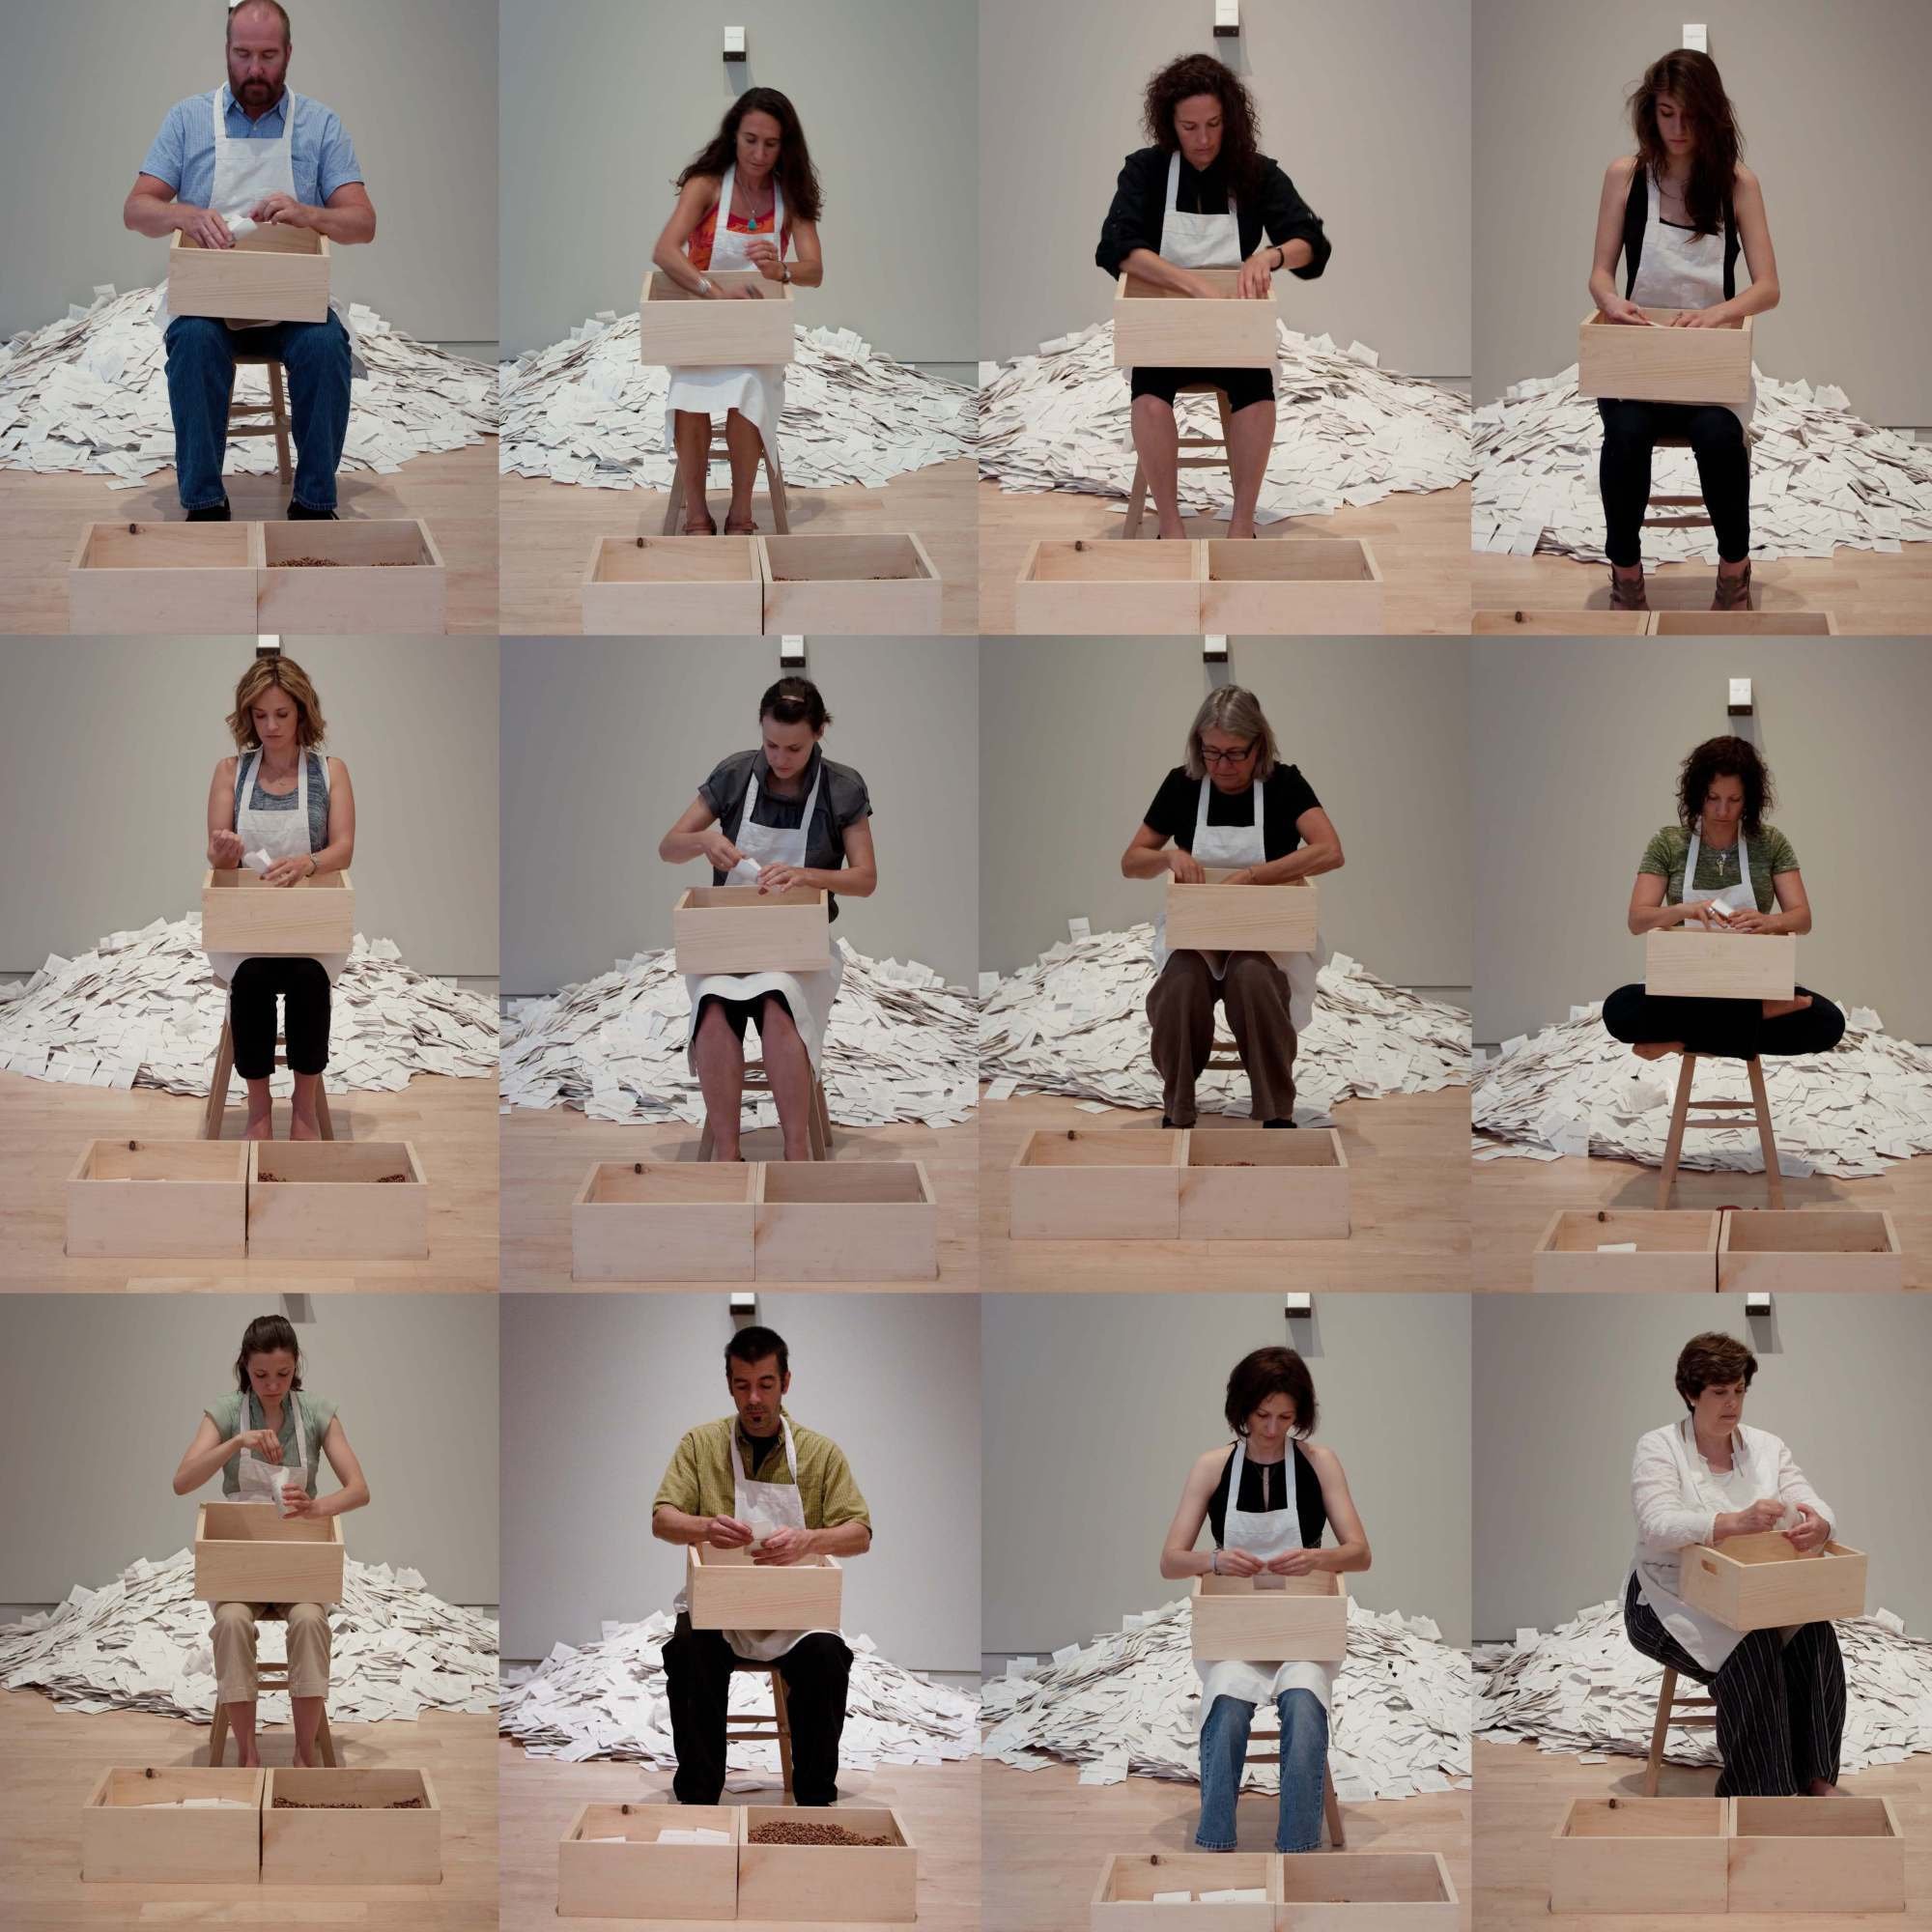 photographs from douglas rosenberg's relational performance art work, forgiveness, showing white envelopes from the performance being filled with hyacinth seeds by participants in the gallery